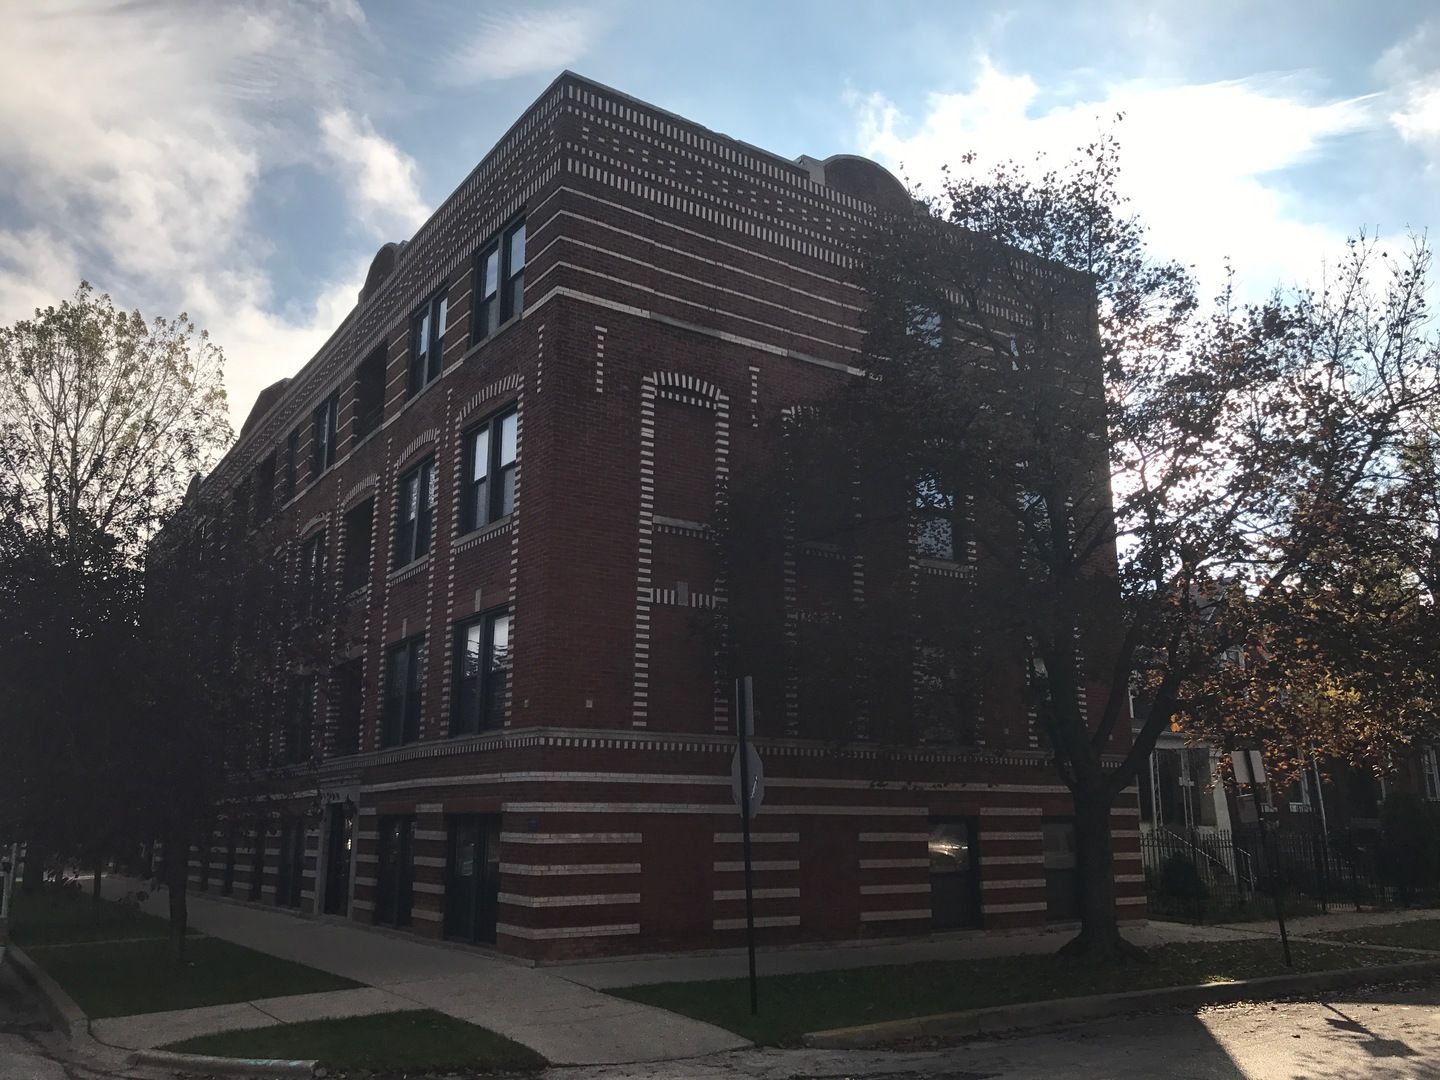 Main Photo: 3923 W Altgeld Street Unit 2 in CHICAGO: CHI - Logan Square Residential Lease for sale ()  : MLS®# 09795589